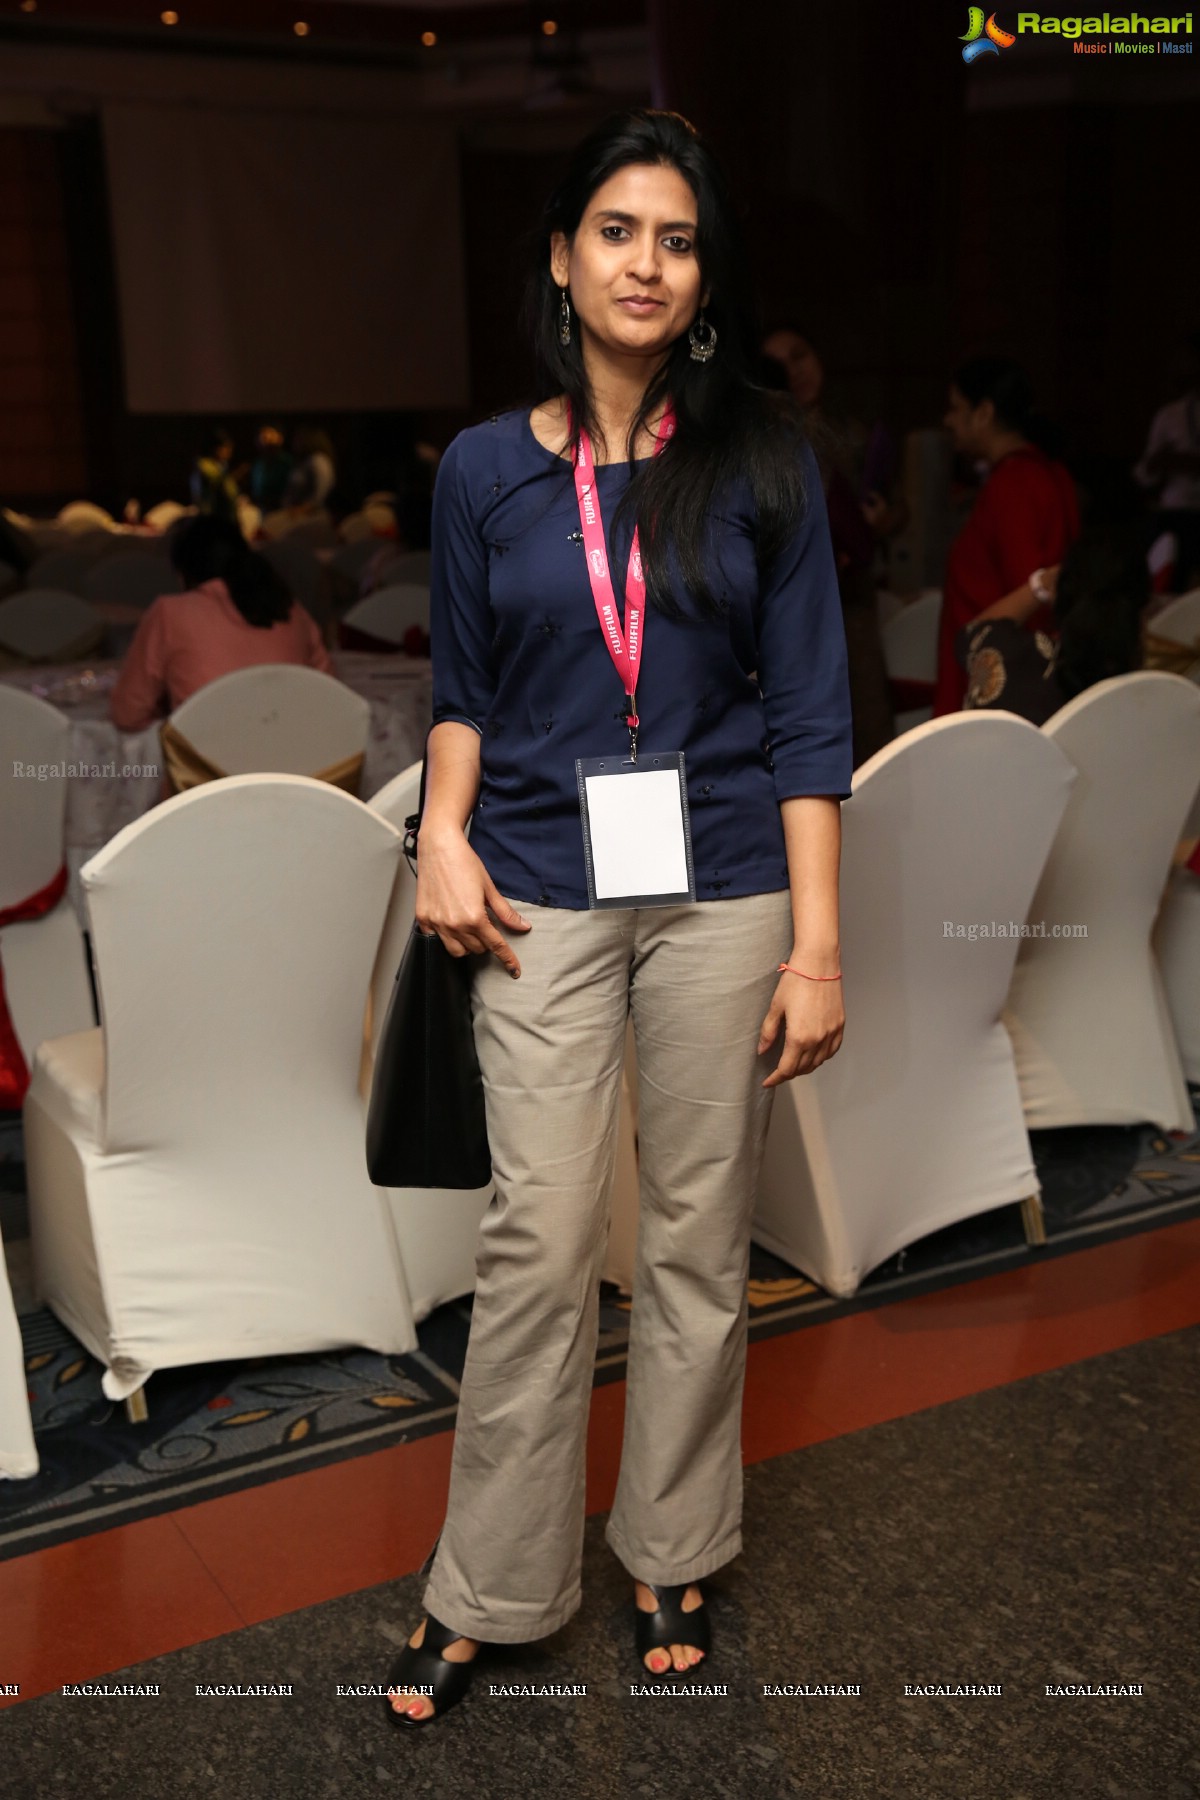 BSICON 2019 - 7th Annual Conference of Breast Imaging Society of India